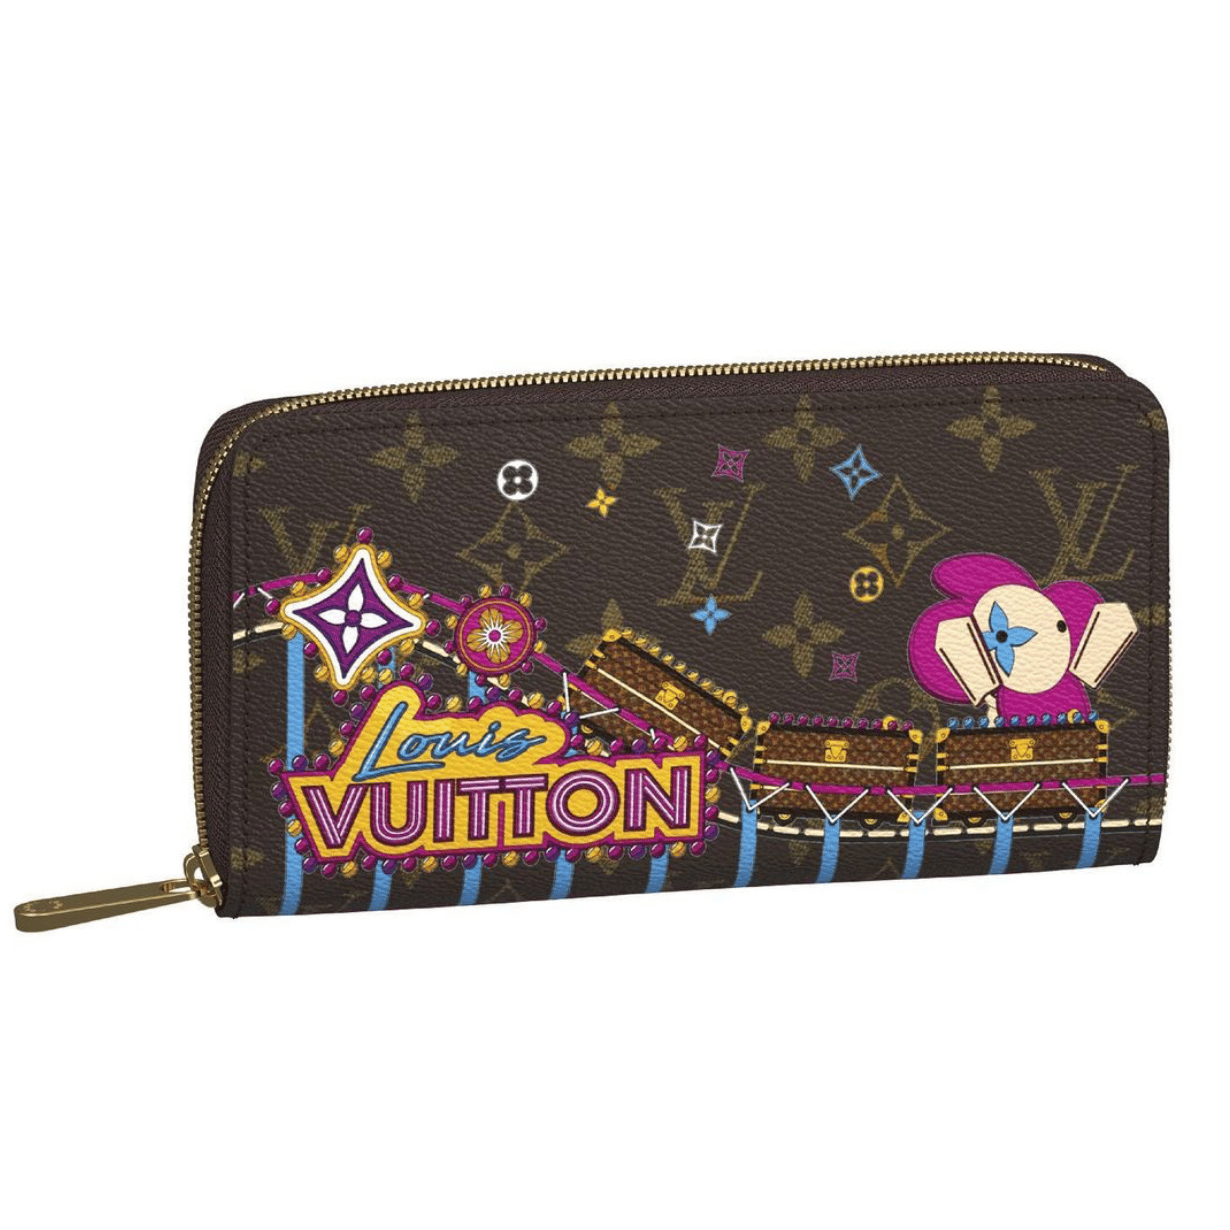 Louis Vuitton Christmas Animation 2020 Bag Collection | Spotted Fashion